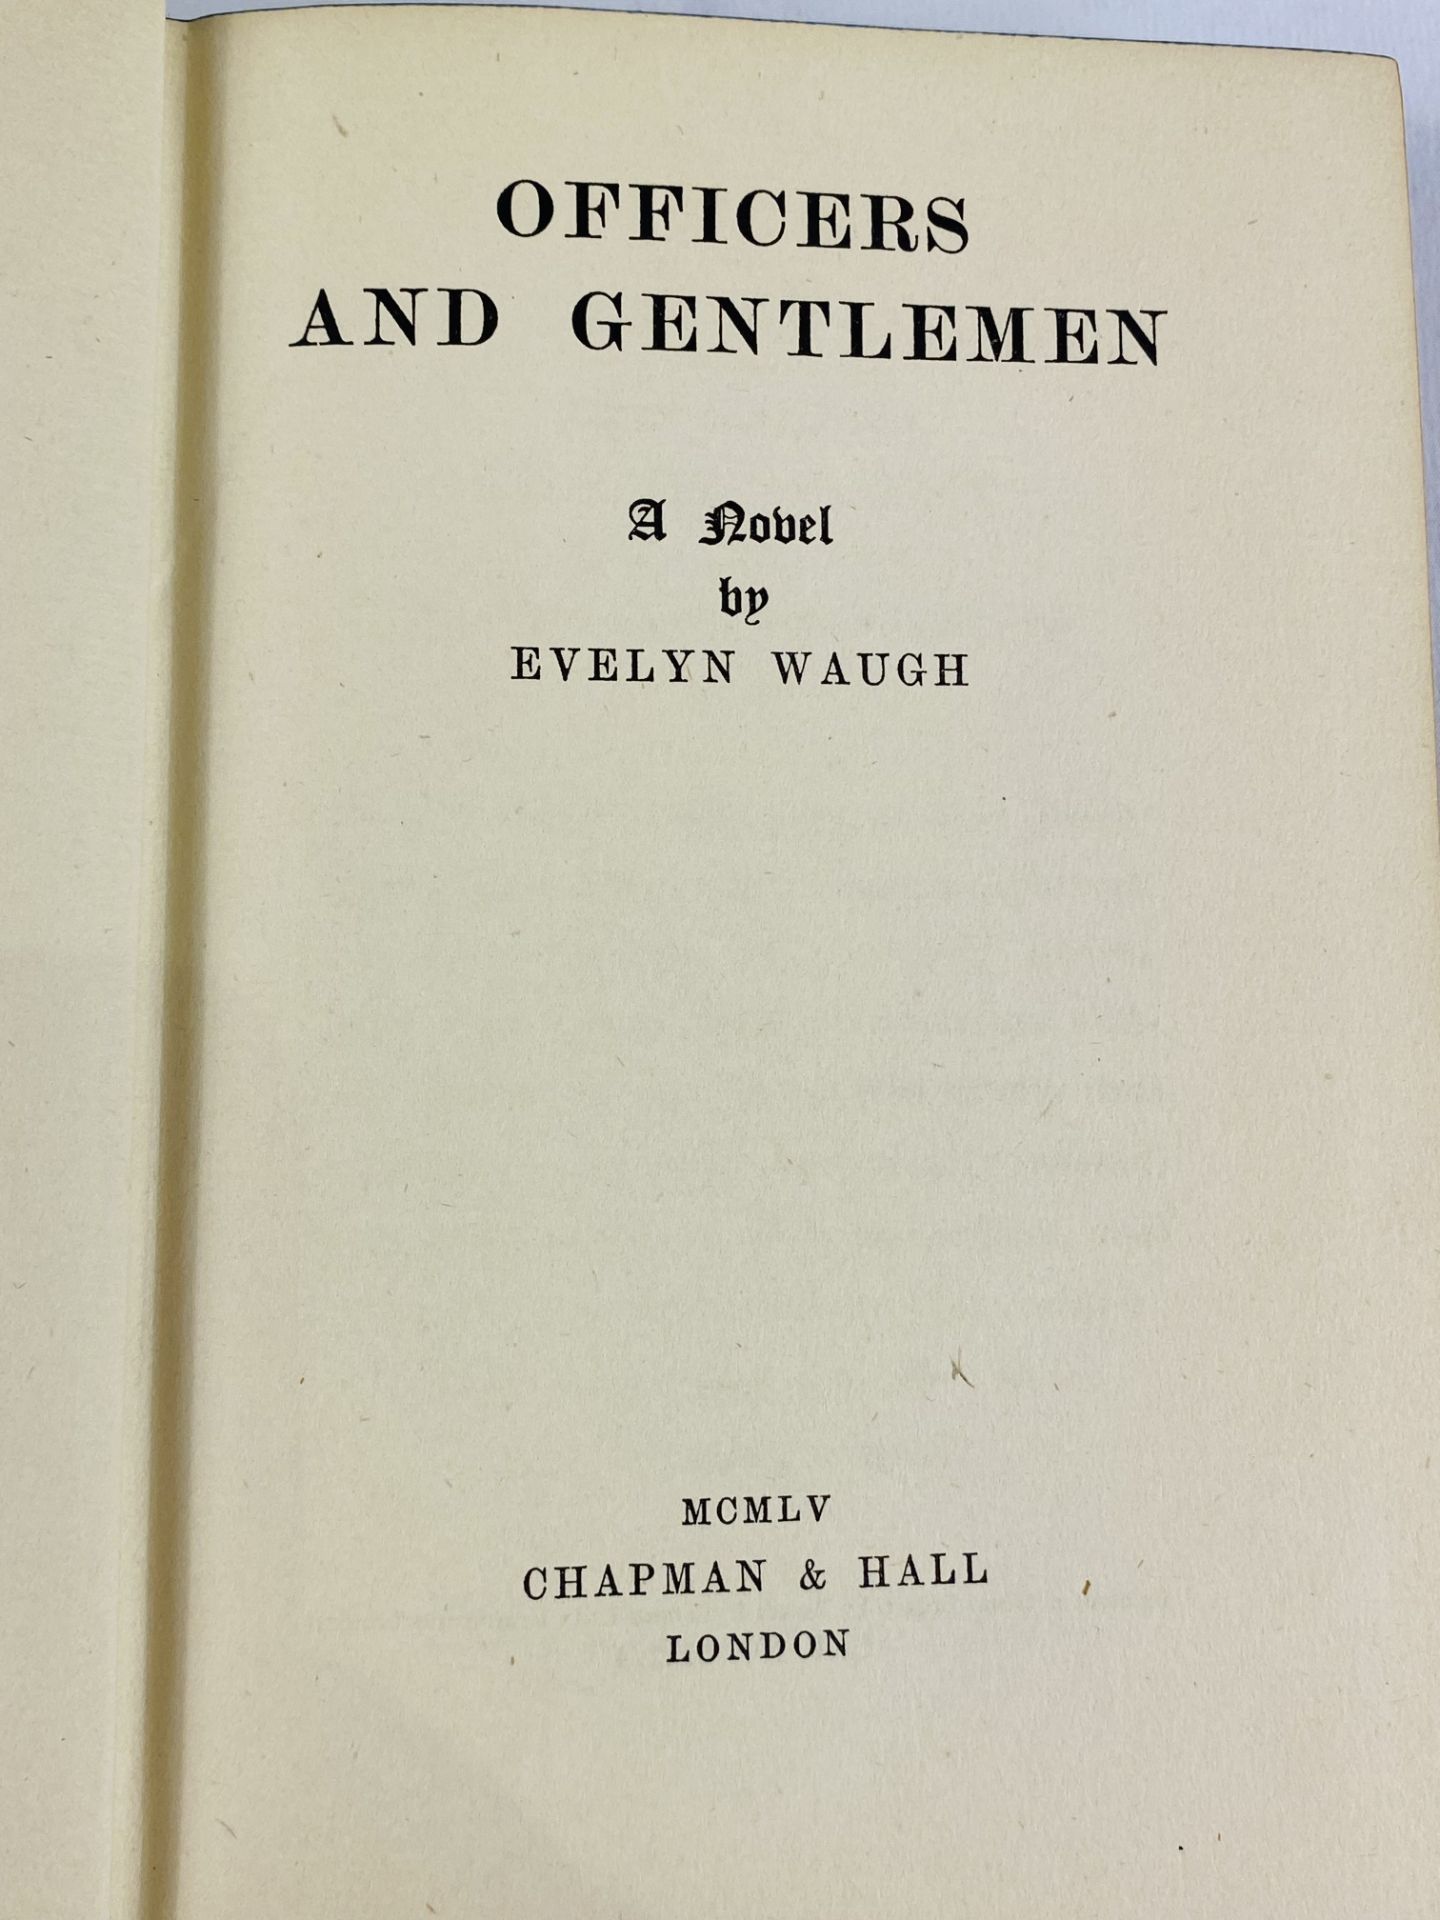 Office and Gentleman by Evelyn Waugh and other books - Image 3 of 3